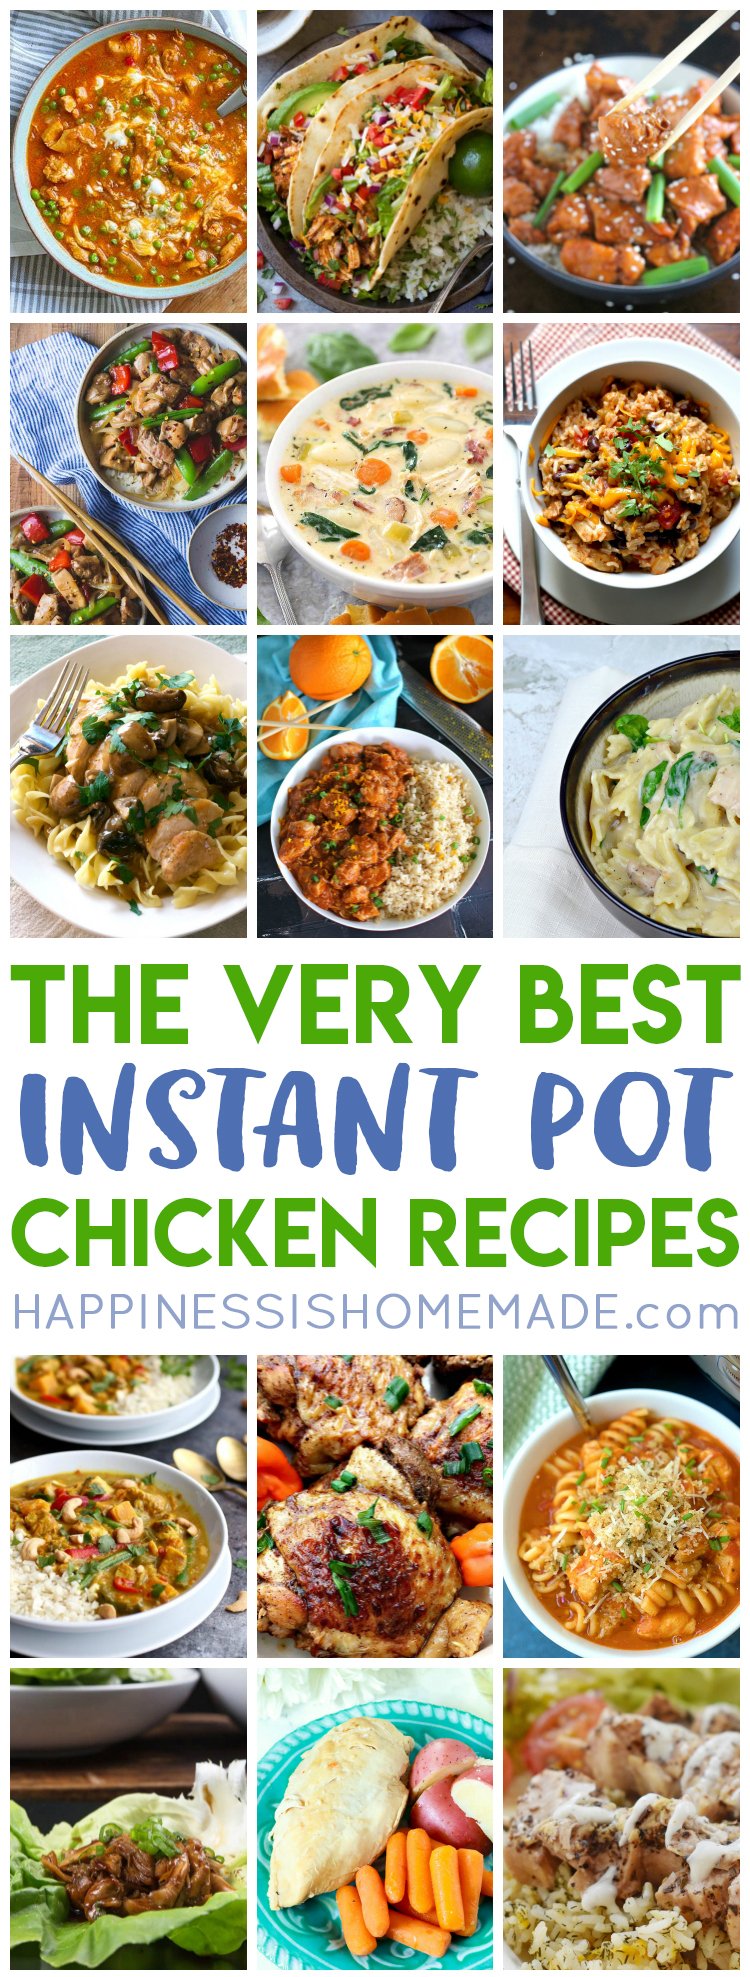 the very best instant pot chicken recipes